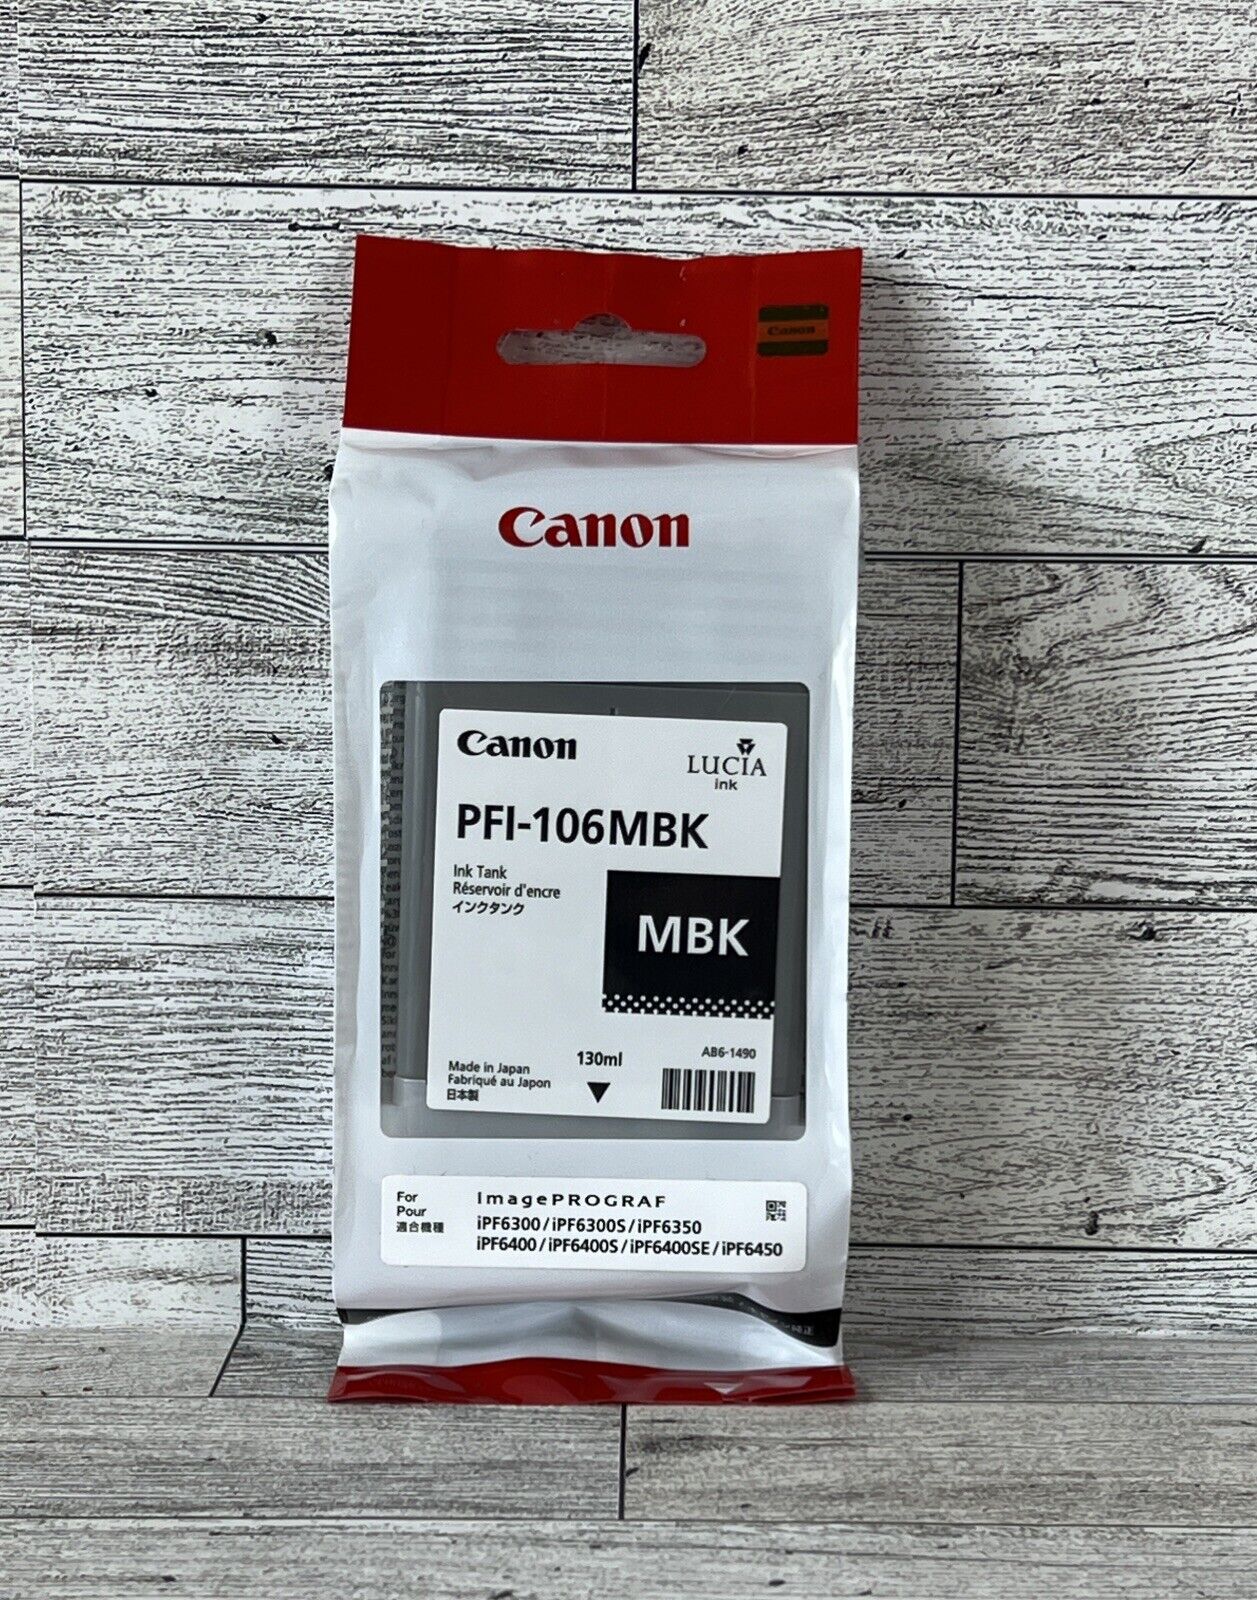 Genuine Canon PFI-106 MBK Ink Tank Expired 09/2019 New In Package Sealed